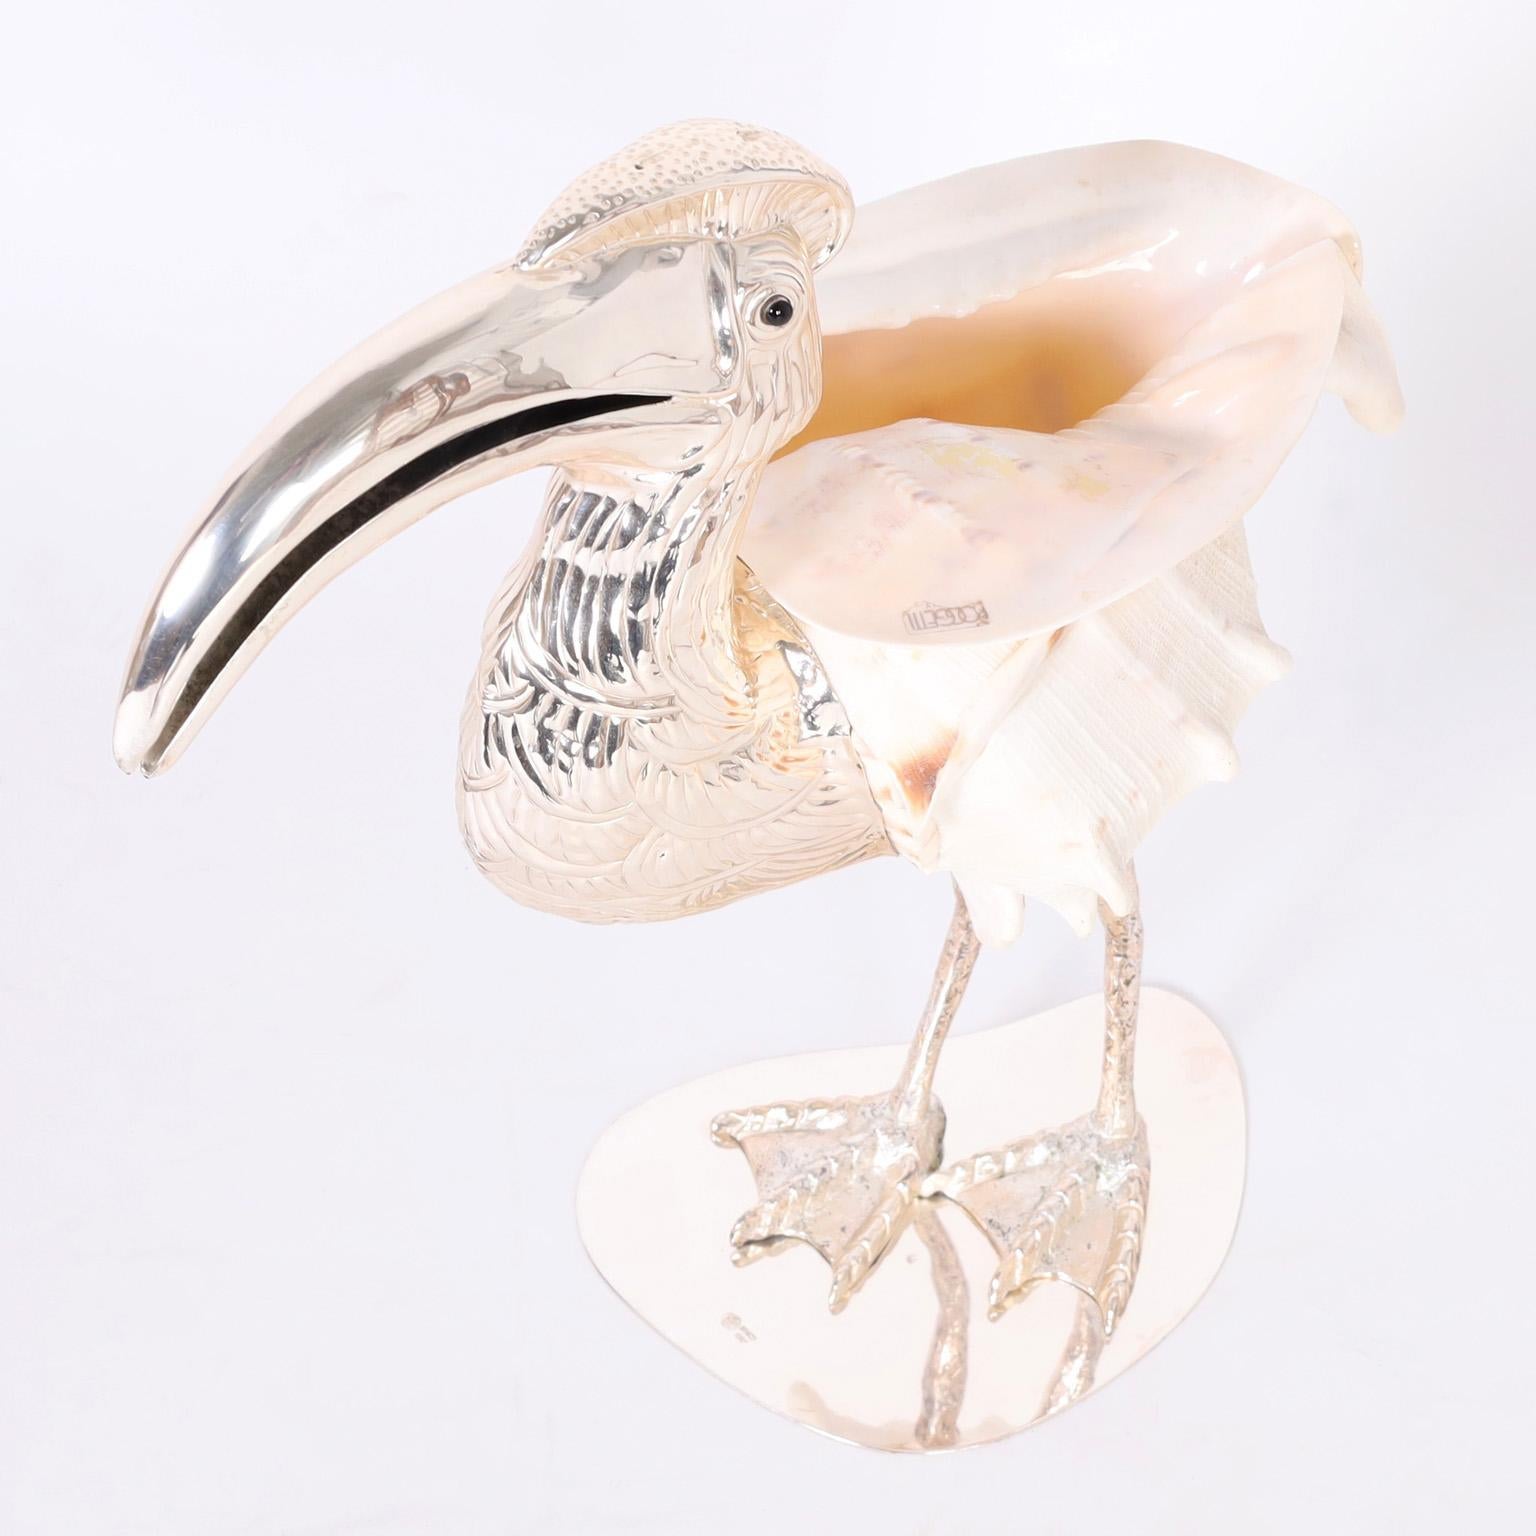 Impressive vintage waterfowl or bird sculpture crafted with an organic king helmets shell and silver plated metal. Signed Binazzi Italy and distributed by Oggetti.